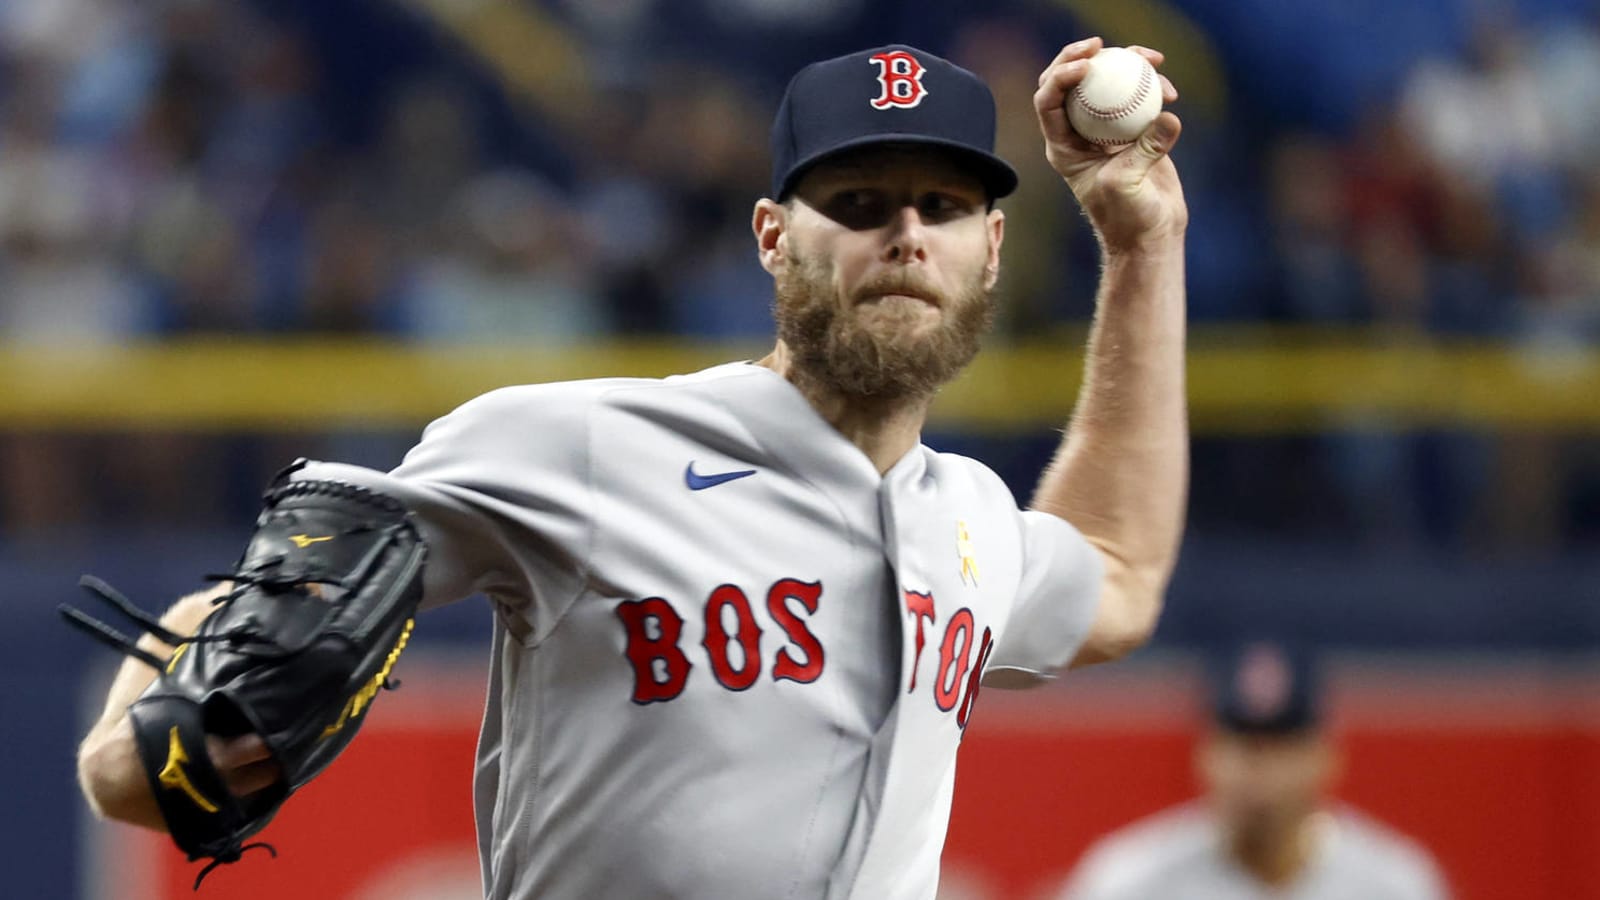 Sale tests positive for COVID-19 as Red Sox outbreak worsens